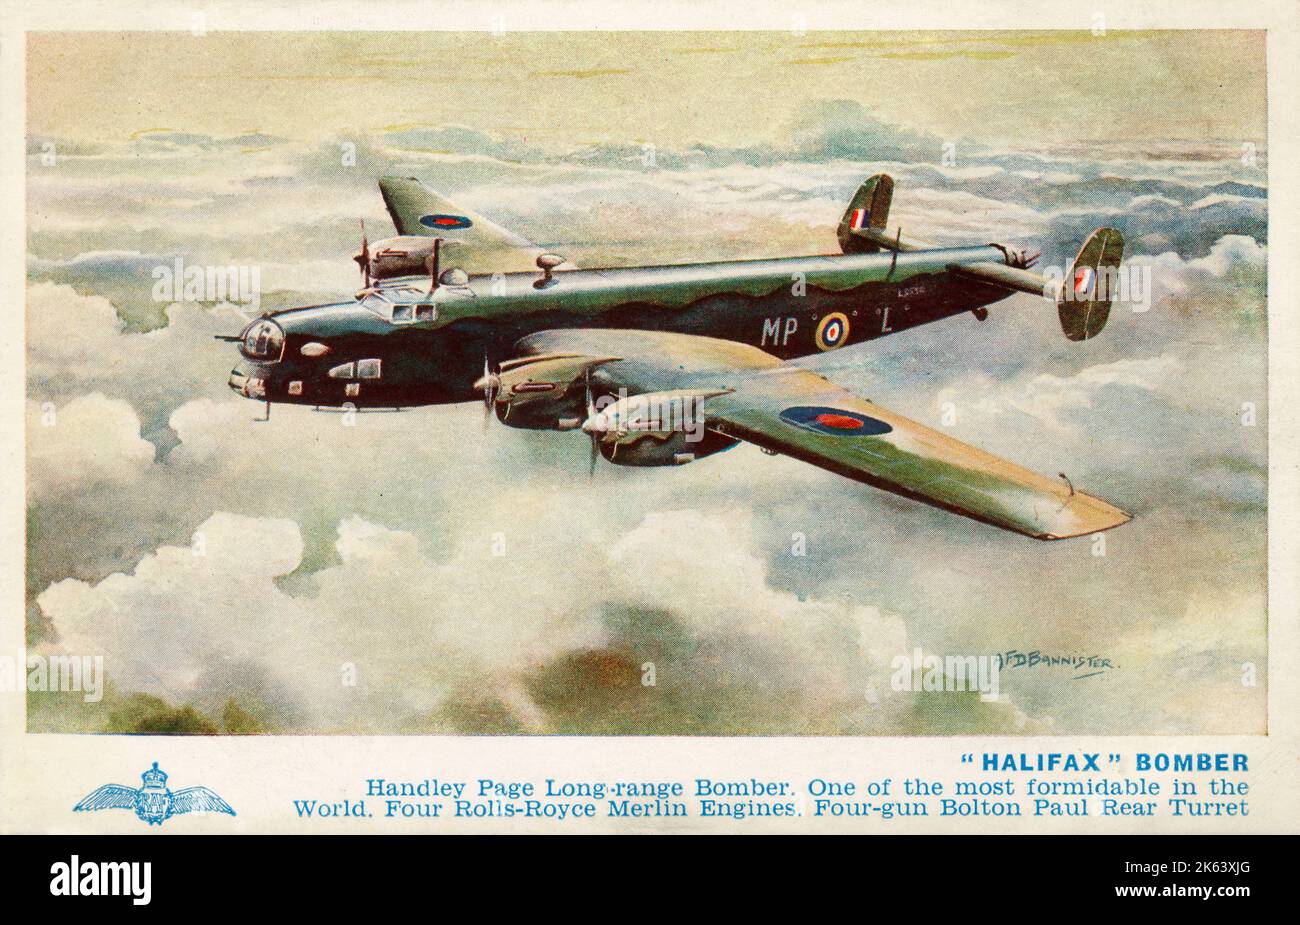 'Halifax' Bomber - Handley Page Long-range Bomber. One of the most formidable in the World. Four Rolls-Royce Merlin Engines. Four-gun Bolton Paul Rear Turret. Stock Photo